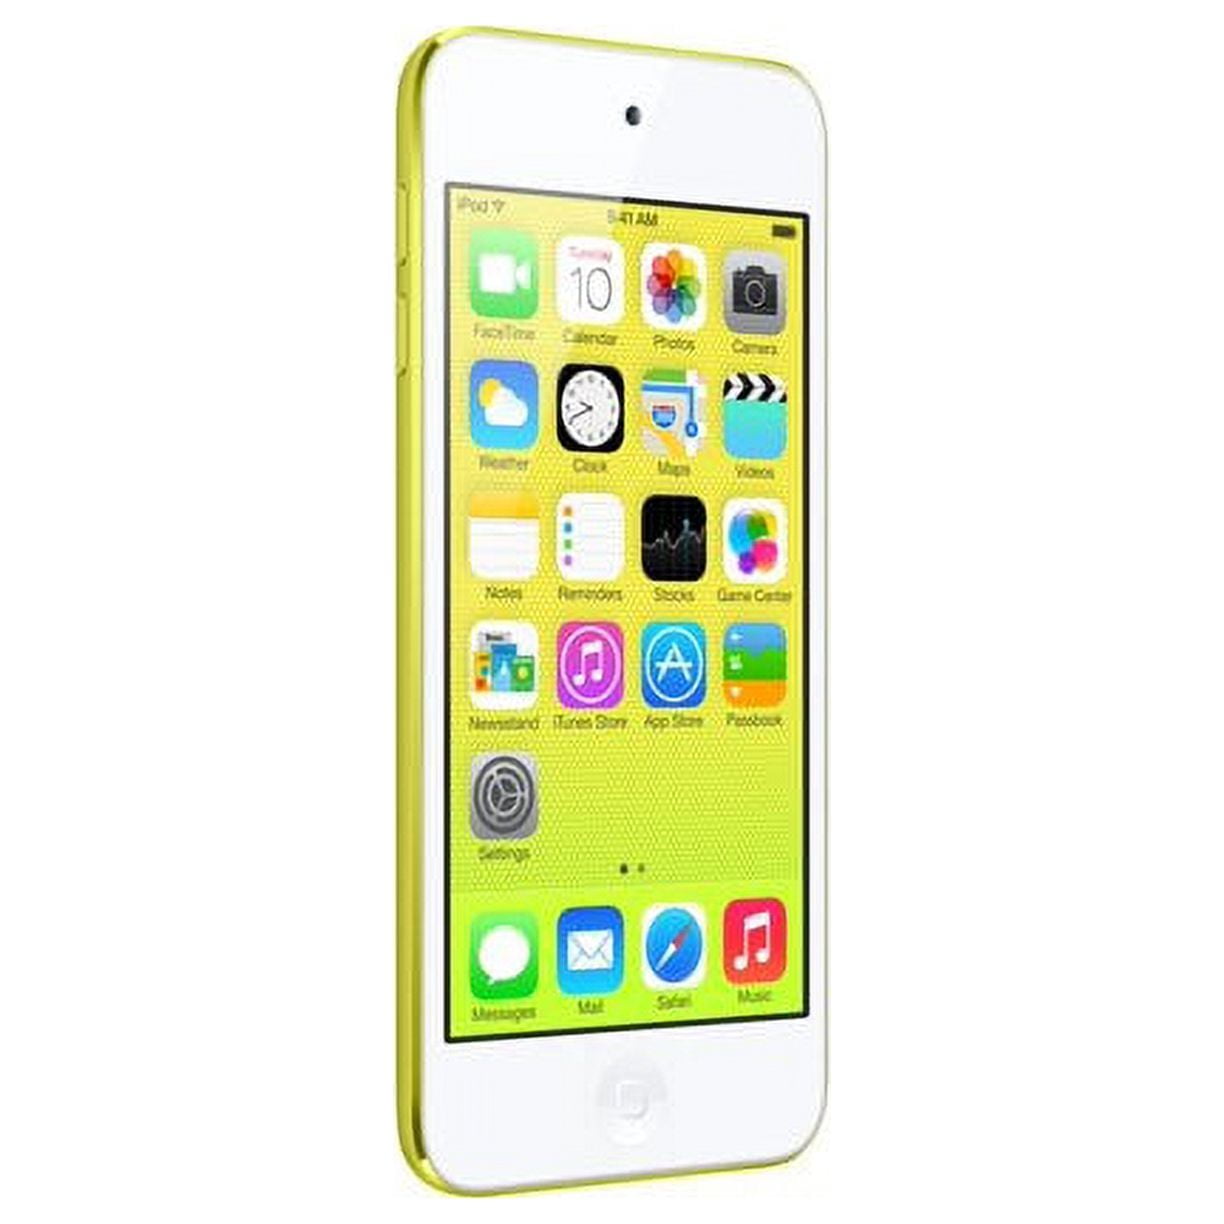 Apple iPod Touch (5th Generation) A1421 (MD714LL/A) - 32GB / Yellow (Used)